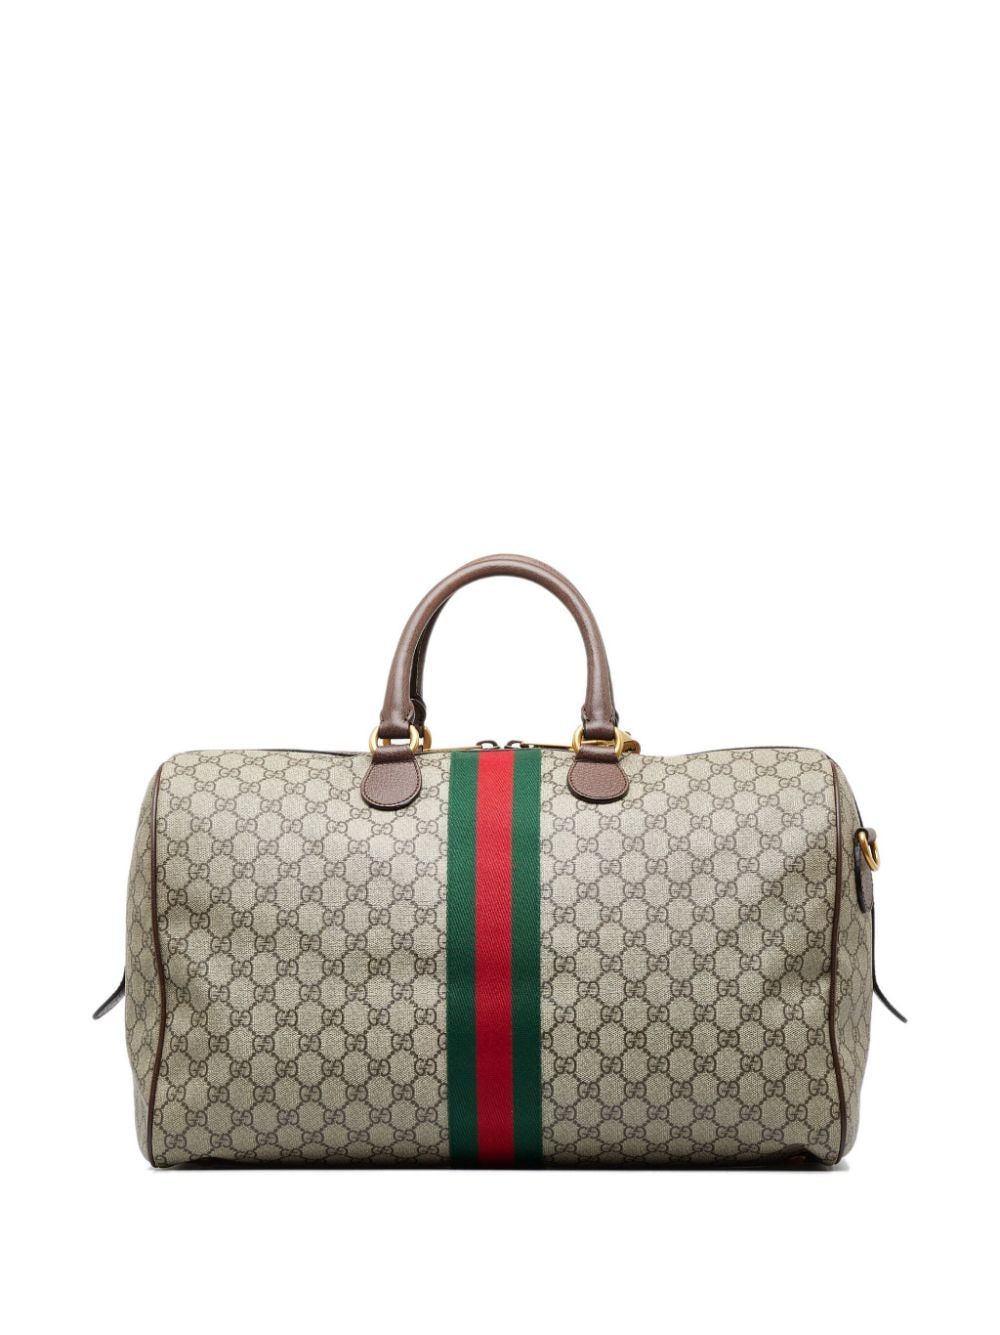 Gucci Pre-Owned GG Supreme Ophidia travel bag - Beige